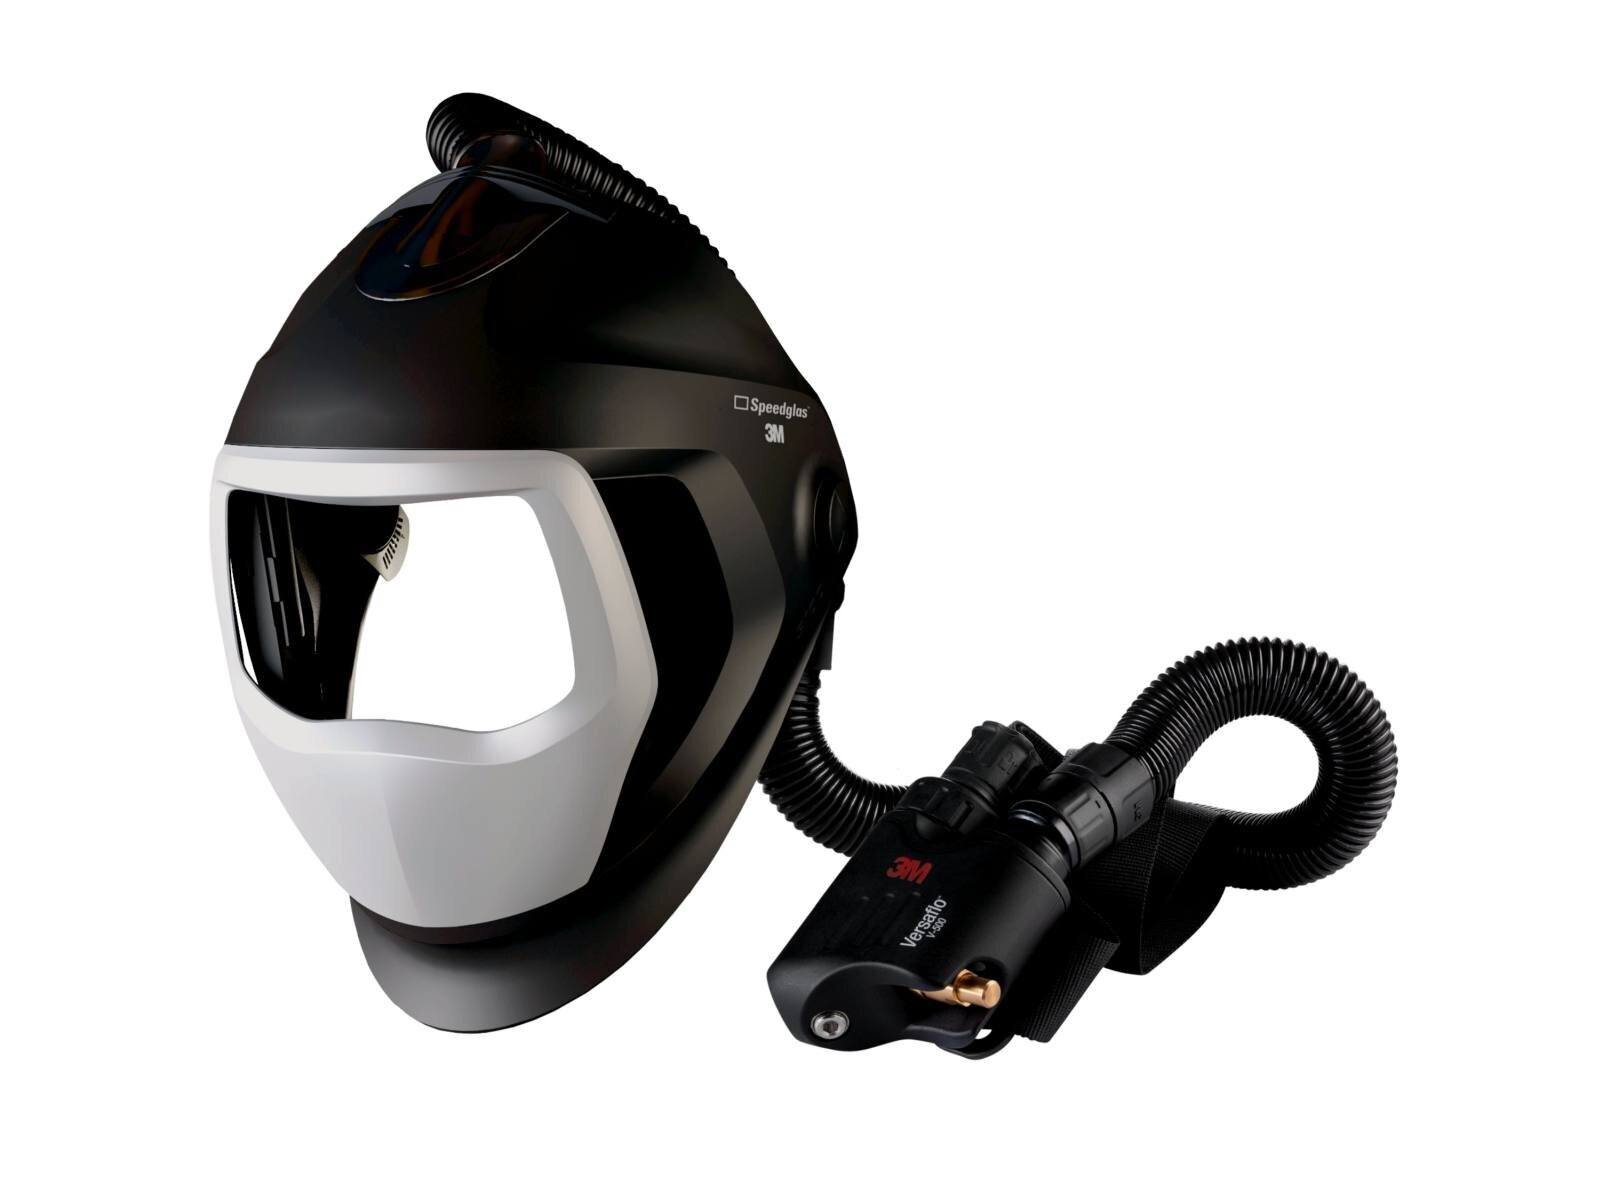  3M Speedglas 9100 Air welding mask without ADF, with Versaflo V-500E compressed air breathing protection, QRS air hose, 5333506 adapter, air flow meter, pre-filter, spark arrester, particle filter, lithium-ion battery and charger incl. storage bag #56850